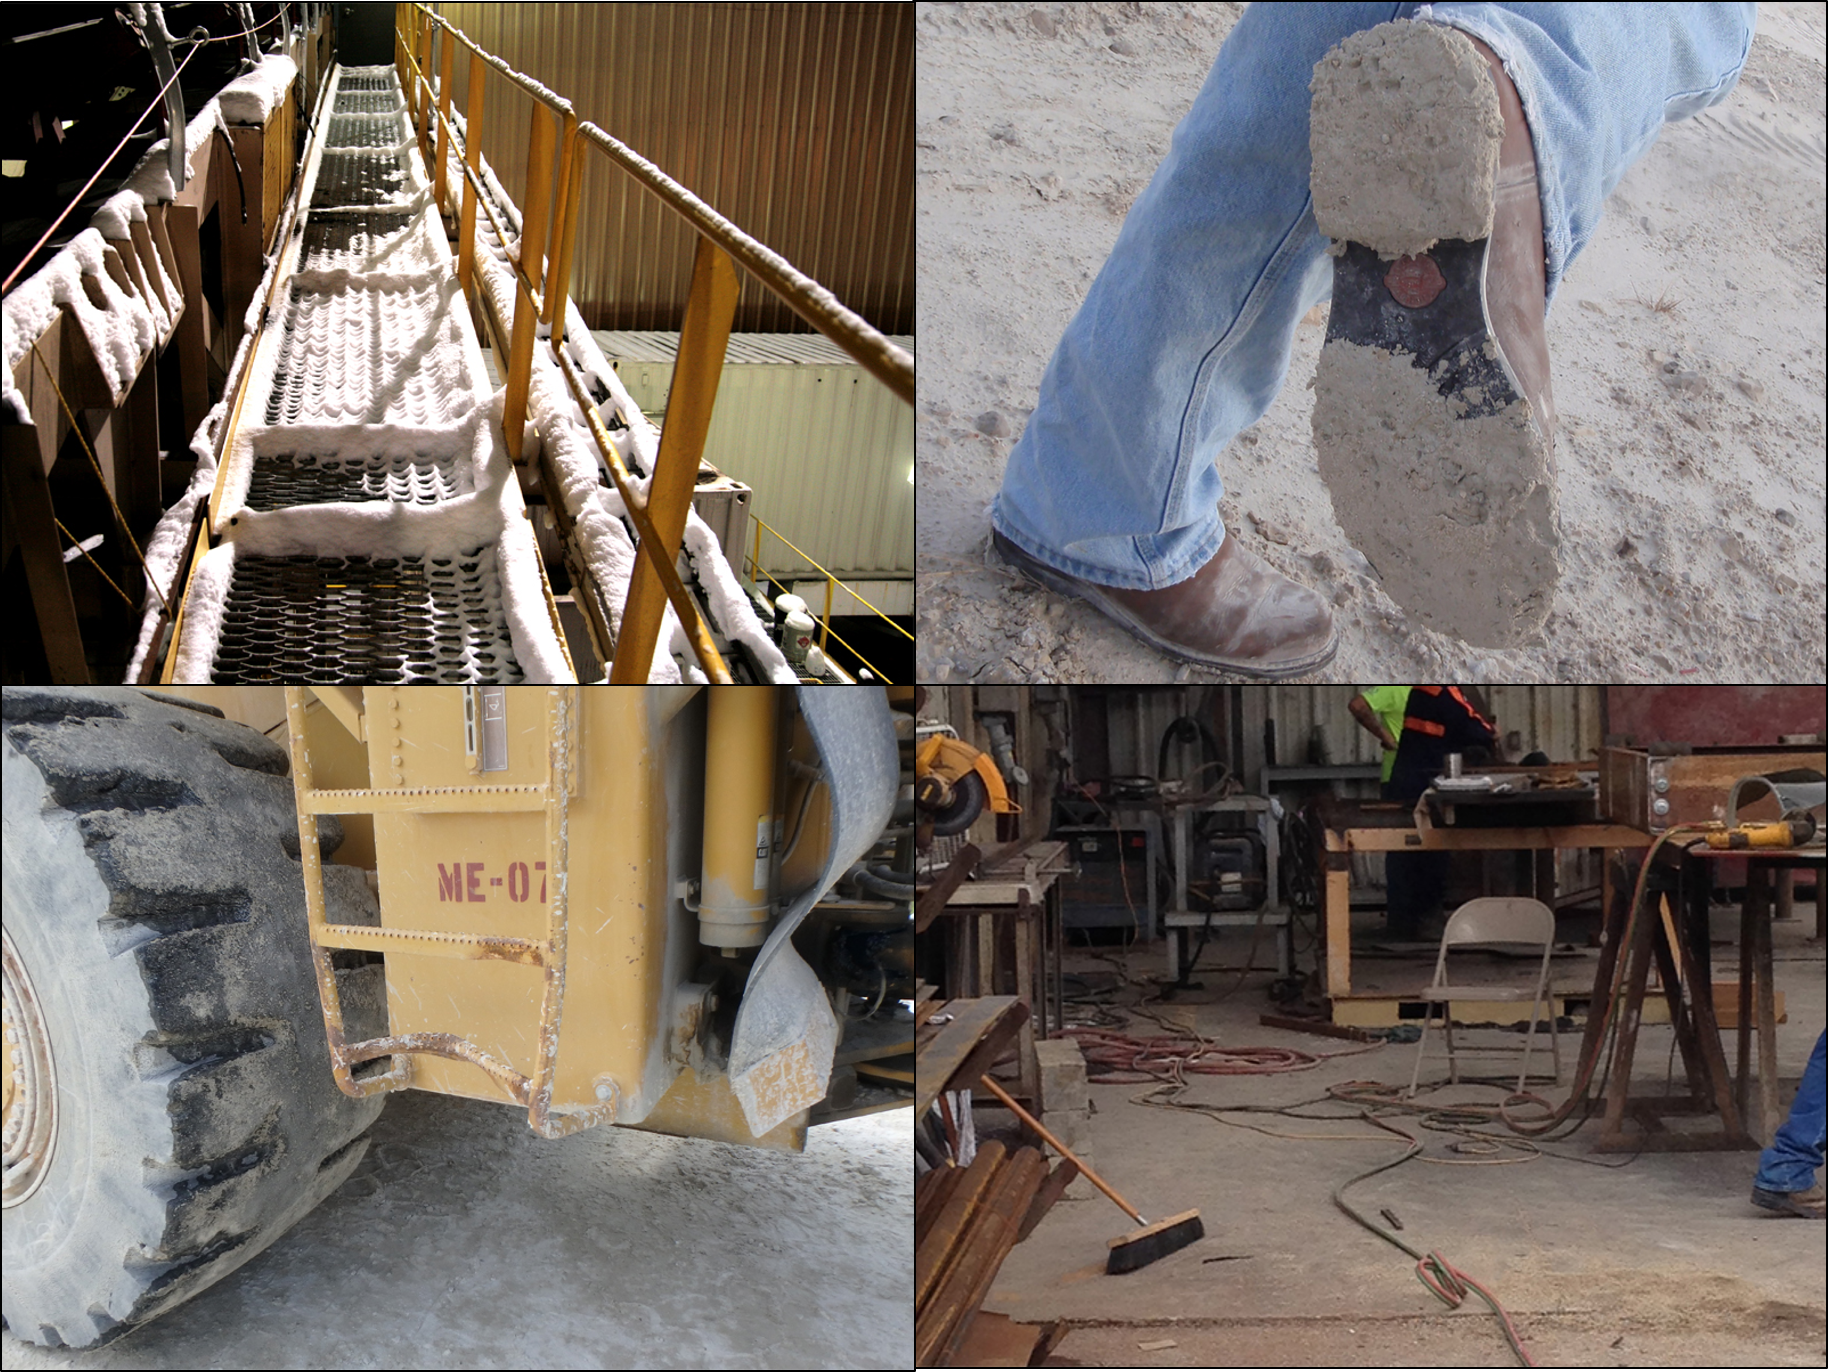 Slip and fall hazards identified at mines: contaminants on walkways (top left), material caked into boots (top right), bent rung of mobile equipment ladder (bottom left), and trip hazards around shops (bottom right).